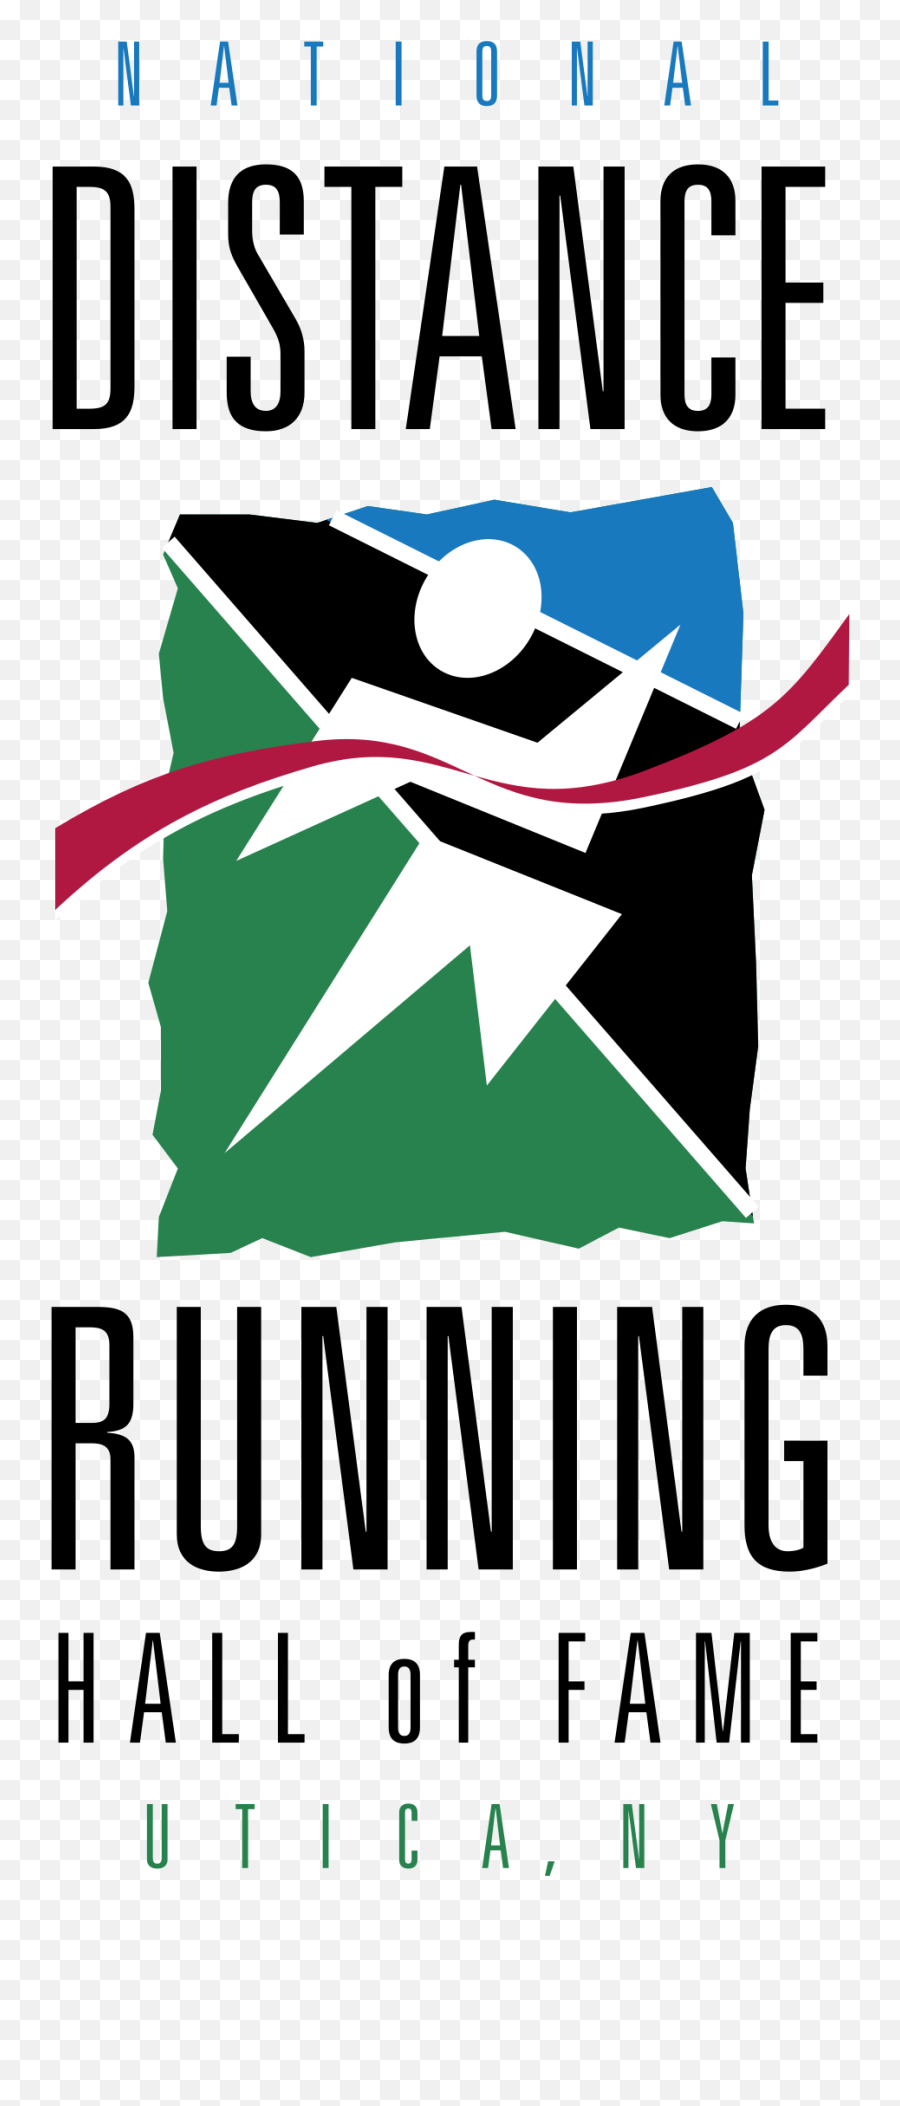 National Distance Running Hall Of Fame Logo Png Transparent - National Distance Running Hall Of Fame,Hall Of Fame Png